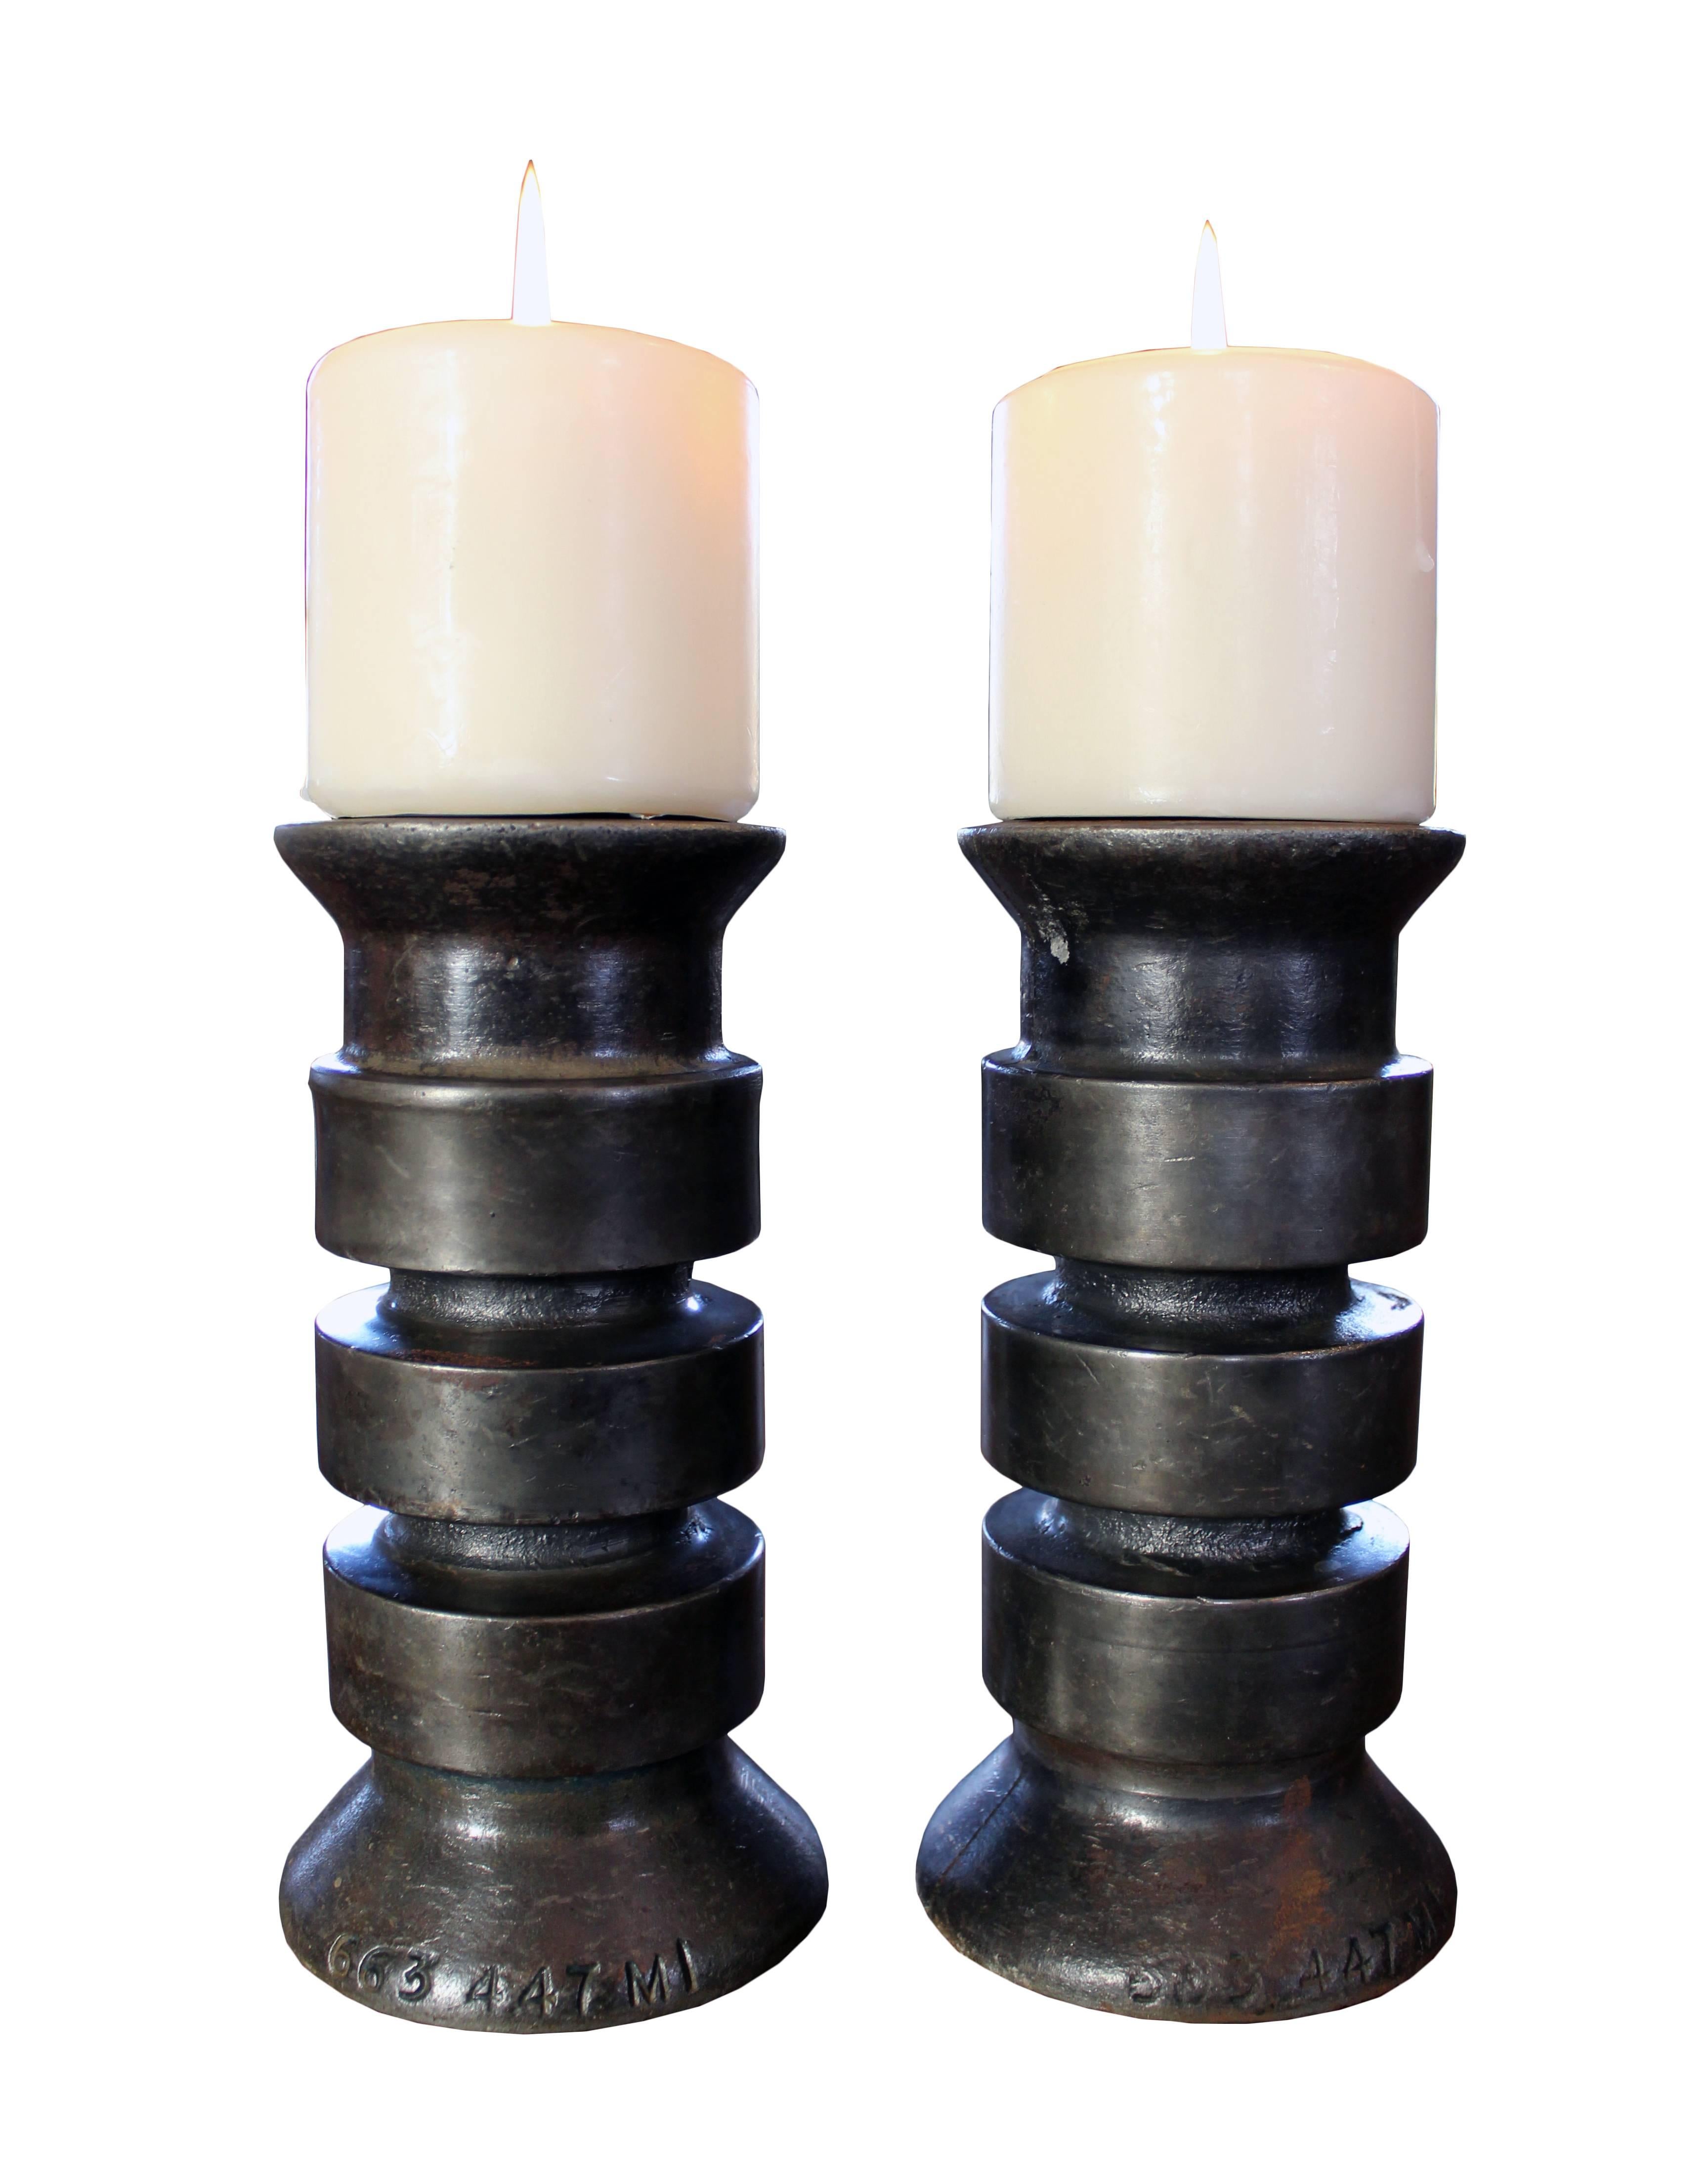 Set of two Industrial vintage steel and metal rustic candlesticks holders and stands. Measures: 7 1/4